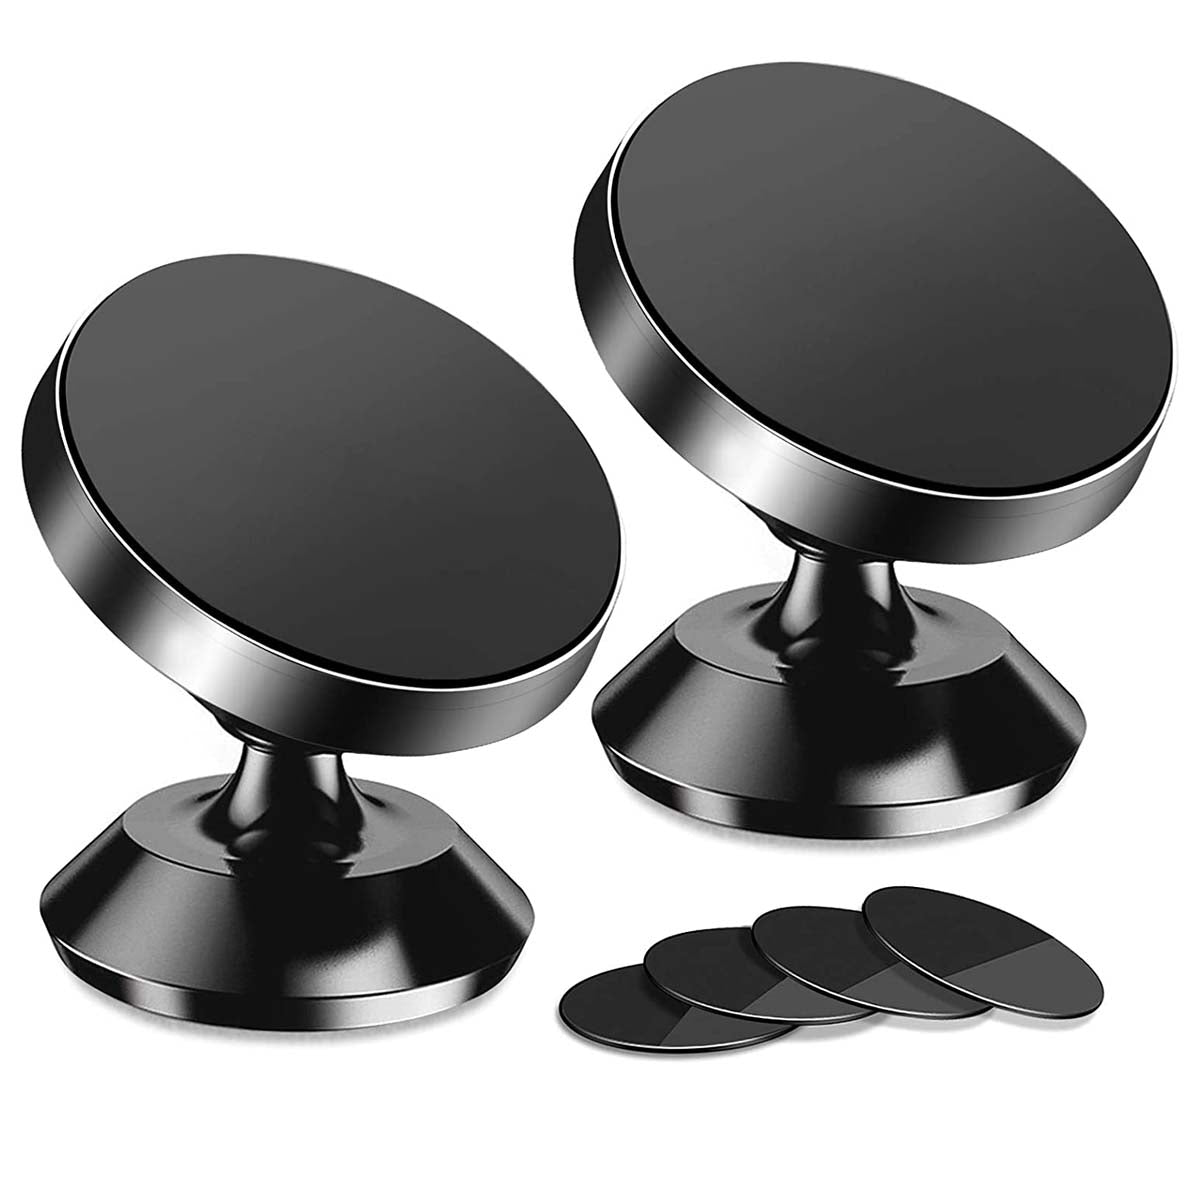 [2 Pack ] Magnetic Phone Mount, Custom For Cars, [ Super Strong Magnet ] [ with 4 Metal Plate ] car Magnetic Phone Holder, [ 360° Rotation ] Universal Dashboard car Mount Fits All Cell Phones, Car Accessories SU13982